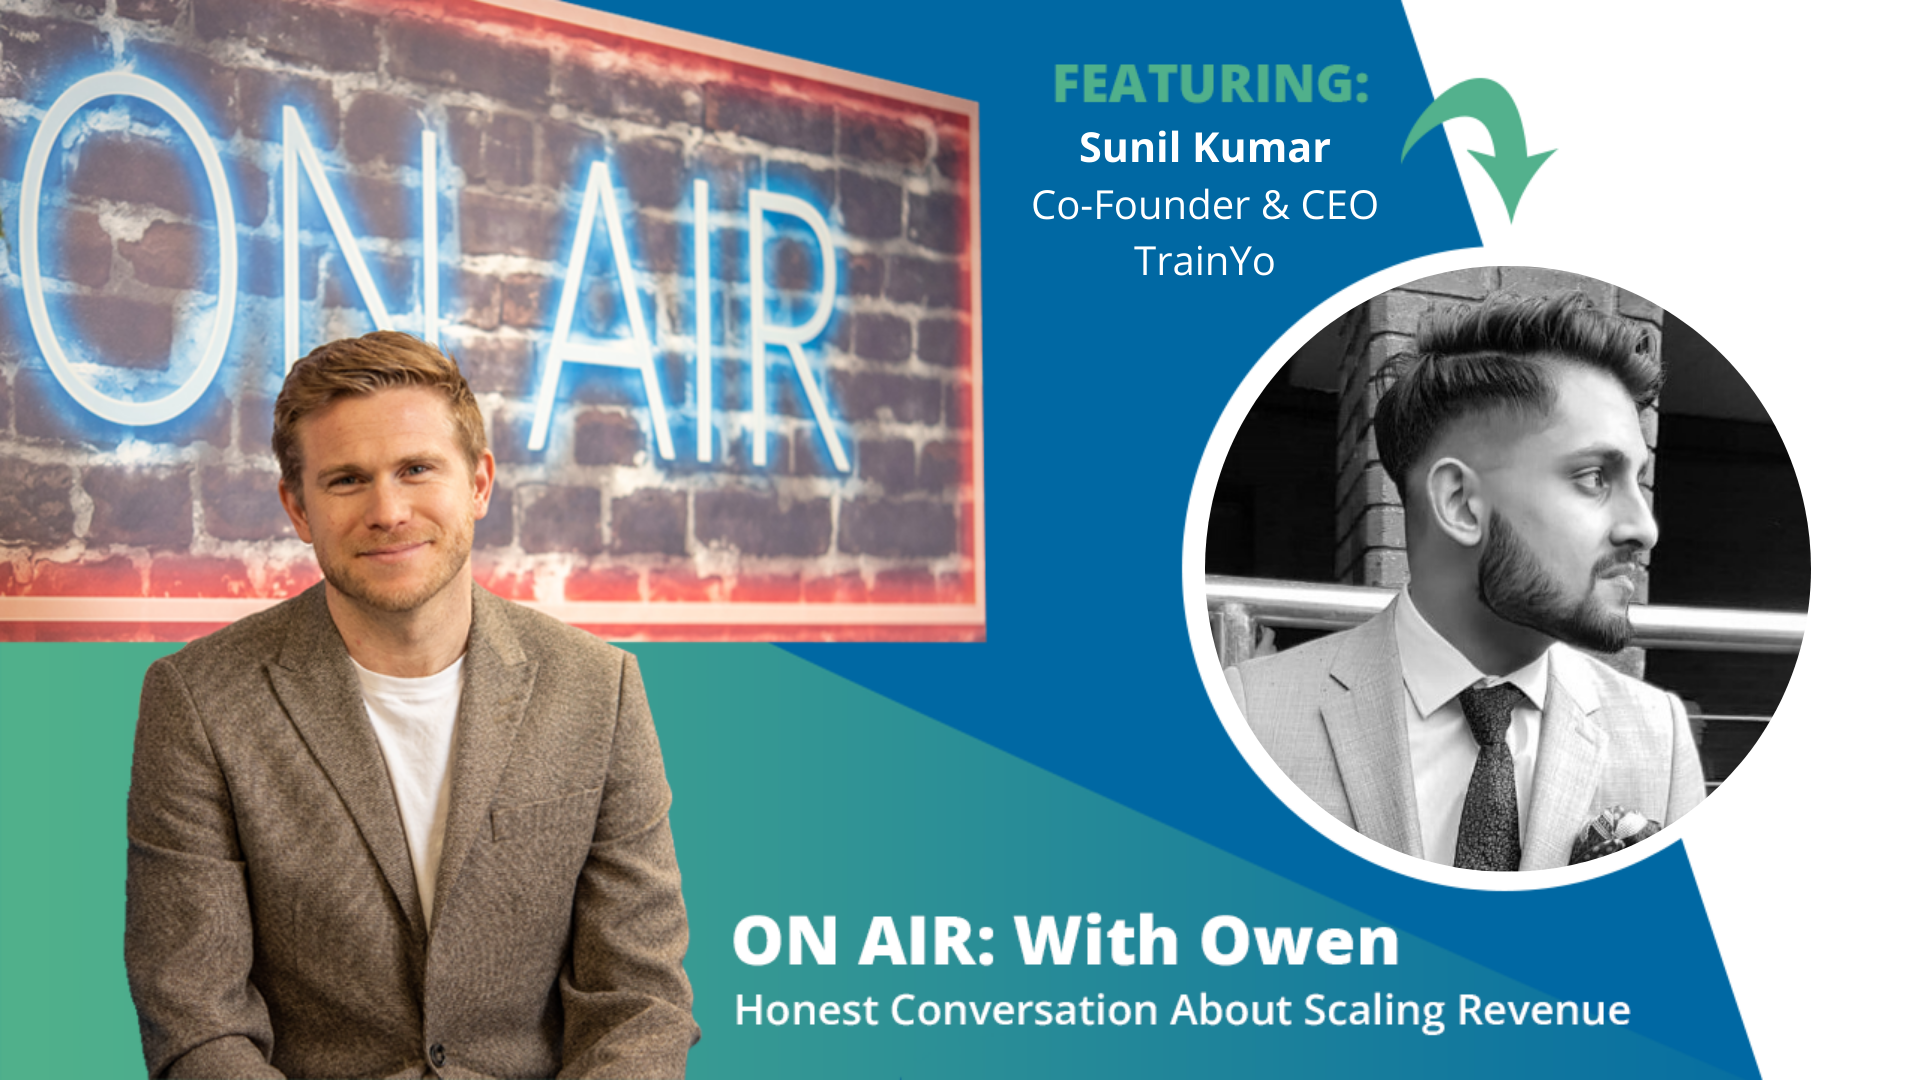 ON AIR: With Owen Episode 49 Featuring Sunil Kumar – Co-Founder & CEO at Trainyo